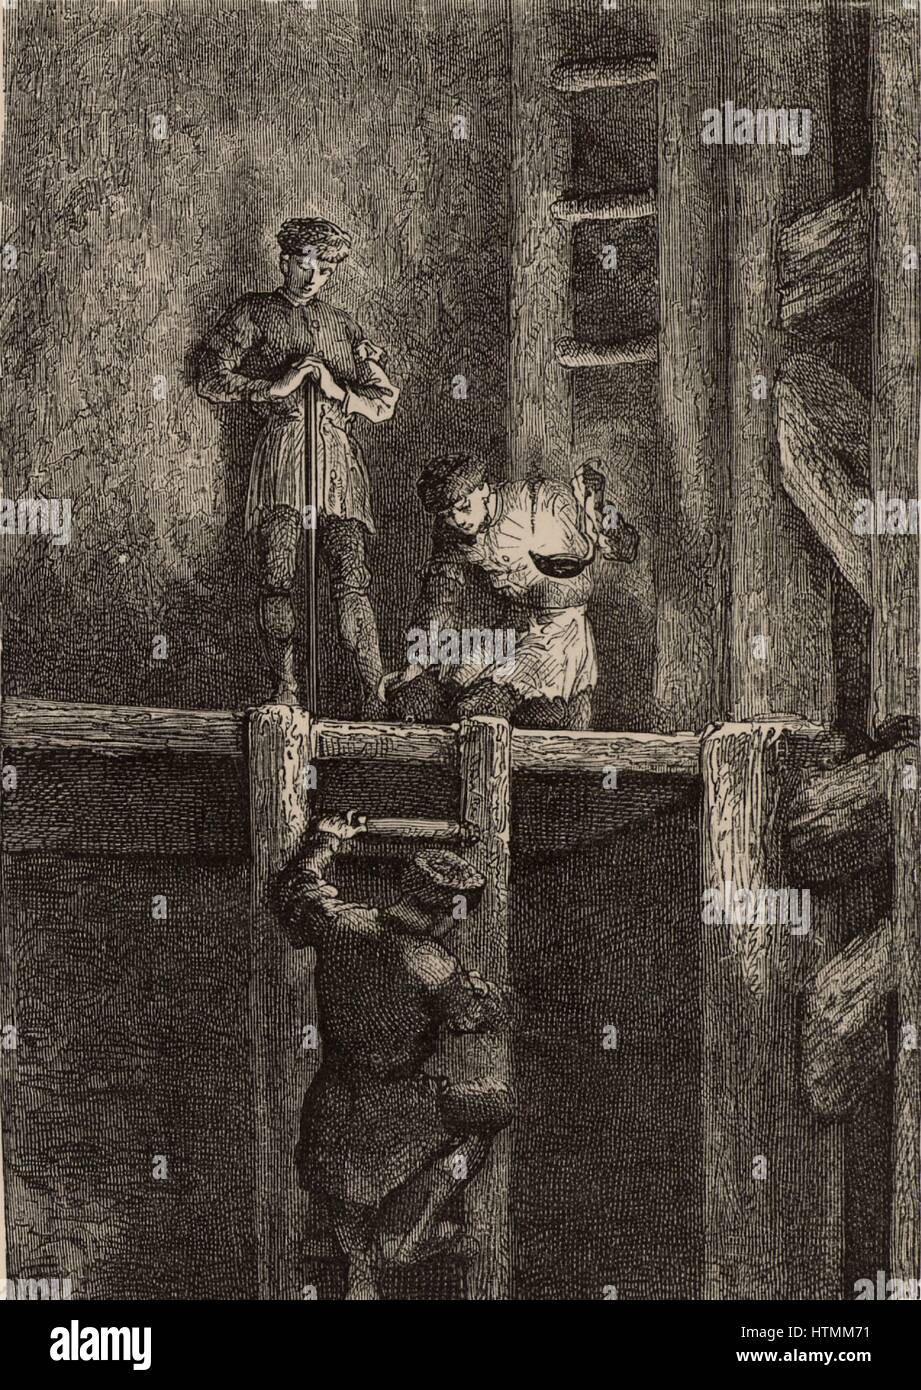 Miners in the Harz mines, Germany, descending the ladder shaft by the light of an oil lamp. From 'Underground Life; or, Mines and Miners' by Louis Simonin (London, 1869). Wood engraving. Stock Photo